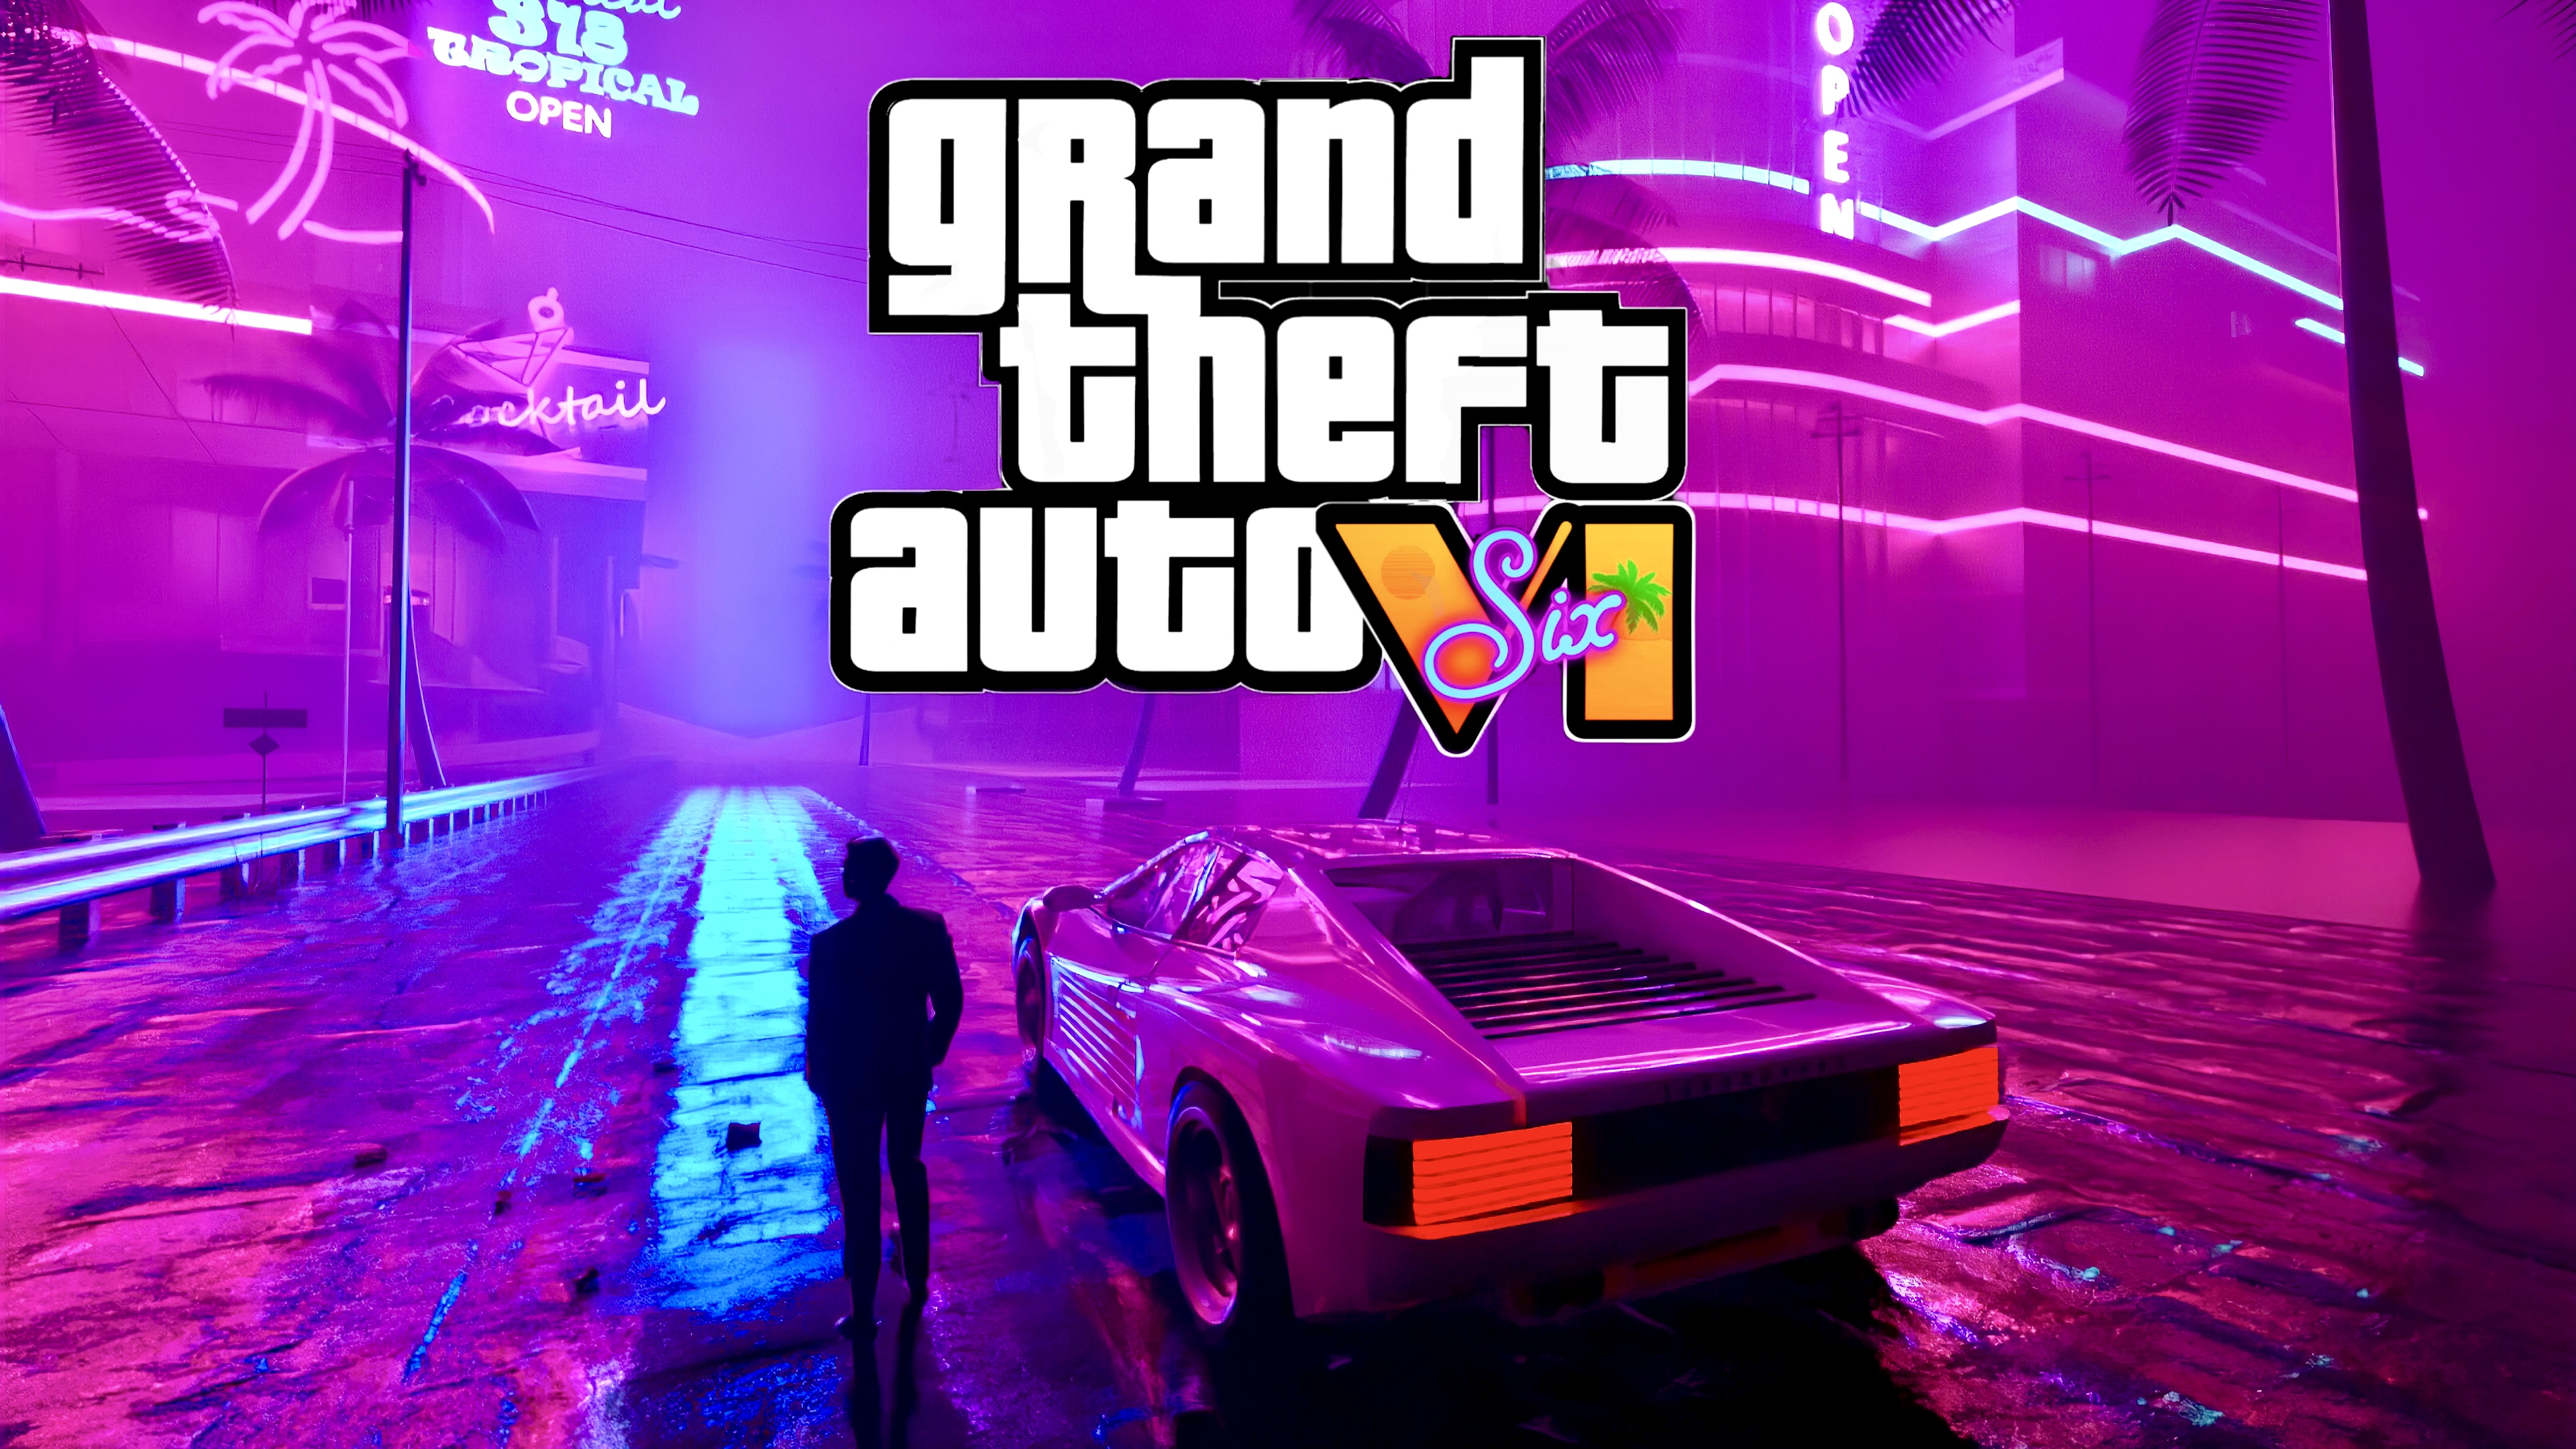 What price will gta 5 be фото 23